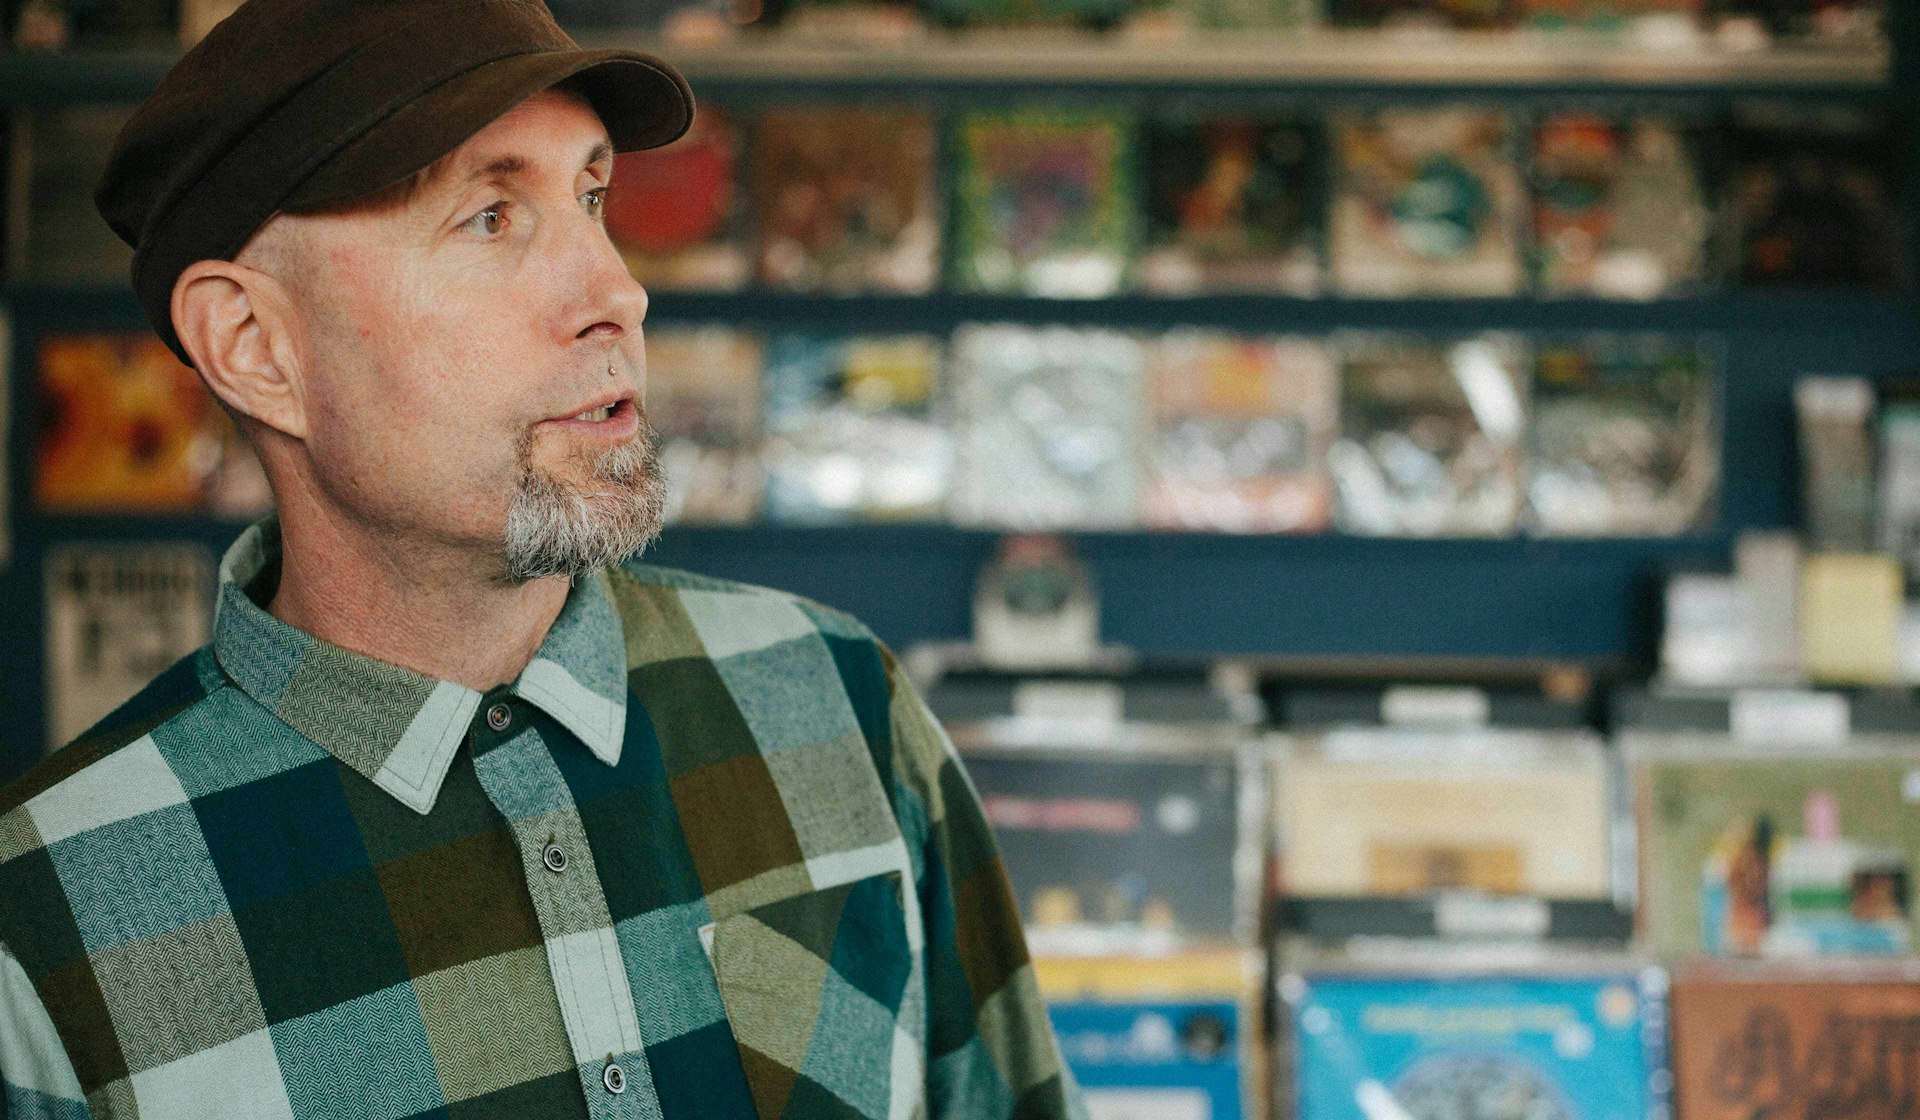 Sub Pop founder Bruce Pavitt on finding world-changing music in nowhere towns